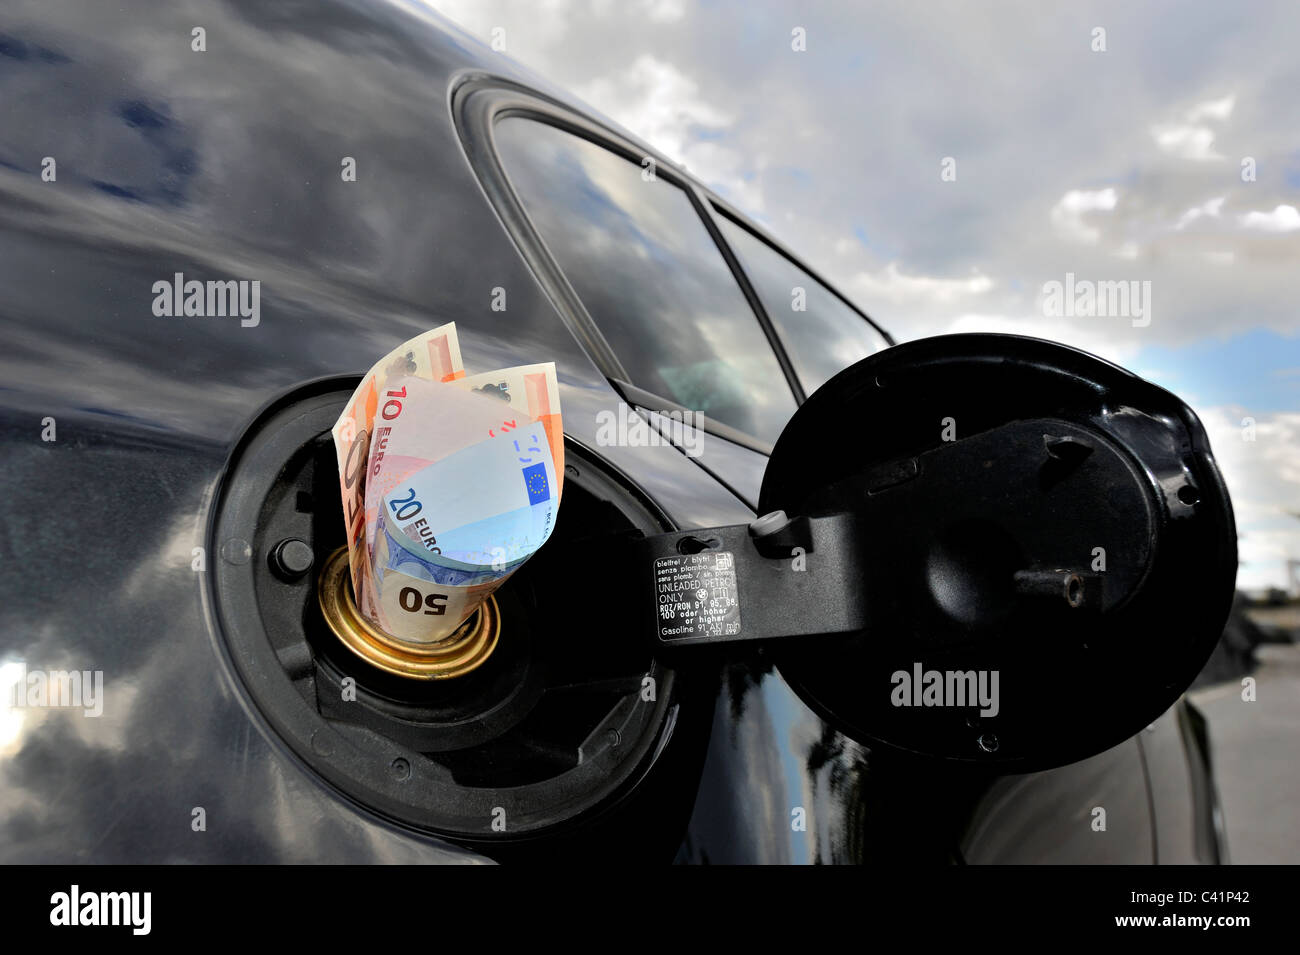 Banknotes in the Fuel Tank of a Car Stock Photo